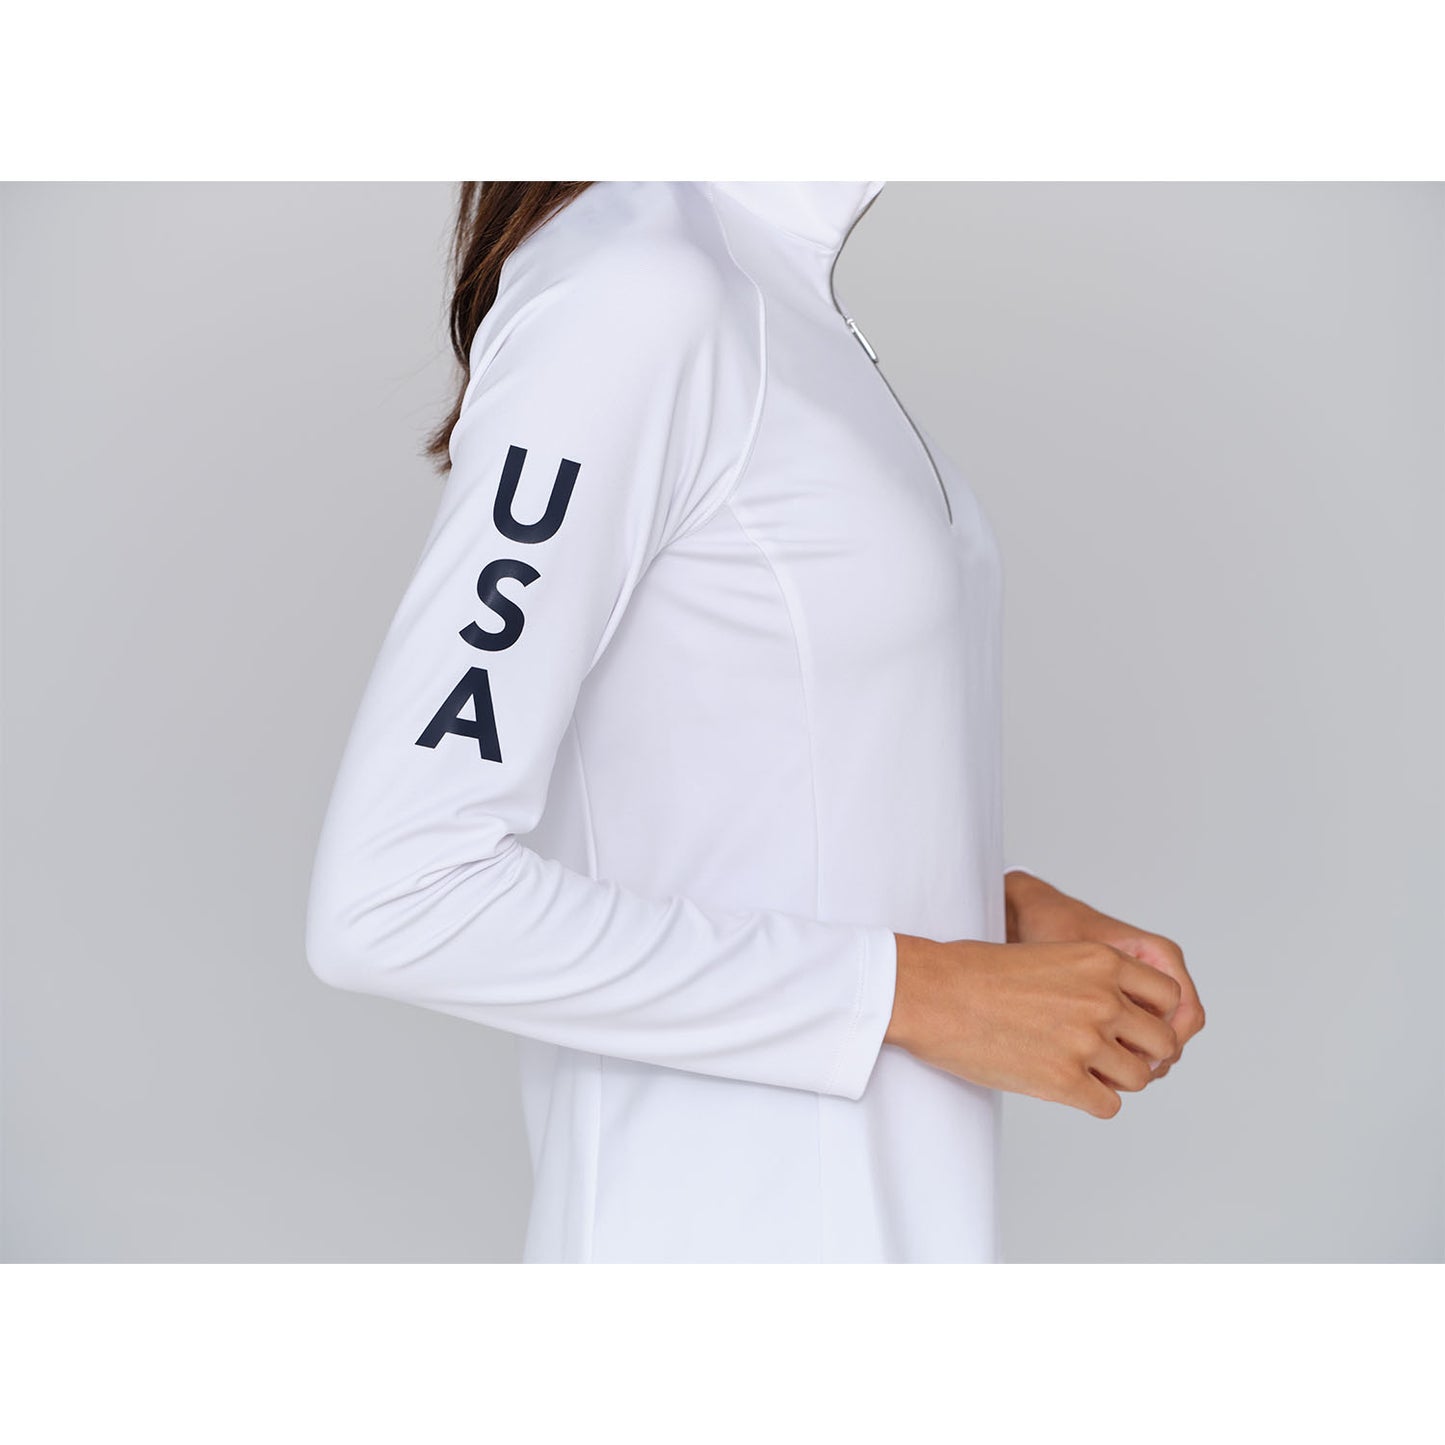 Dunning 2023 LPGA Official Solheim Cup Team Uniform Women's Player Jersey Performance Quarter Zip in White - Zoomed in Lifestyle Right Side View